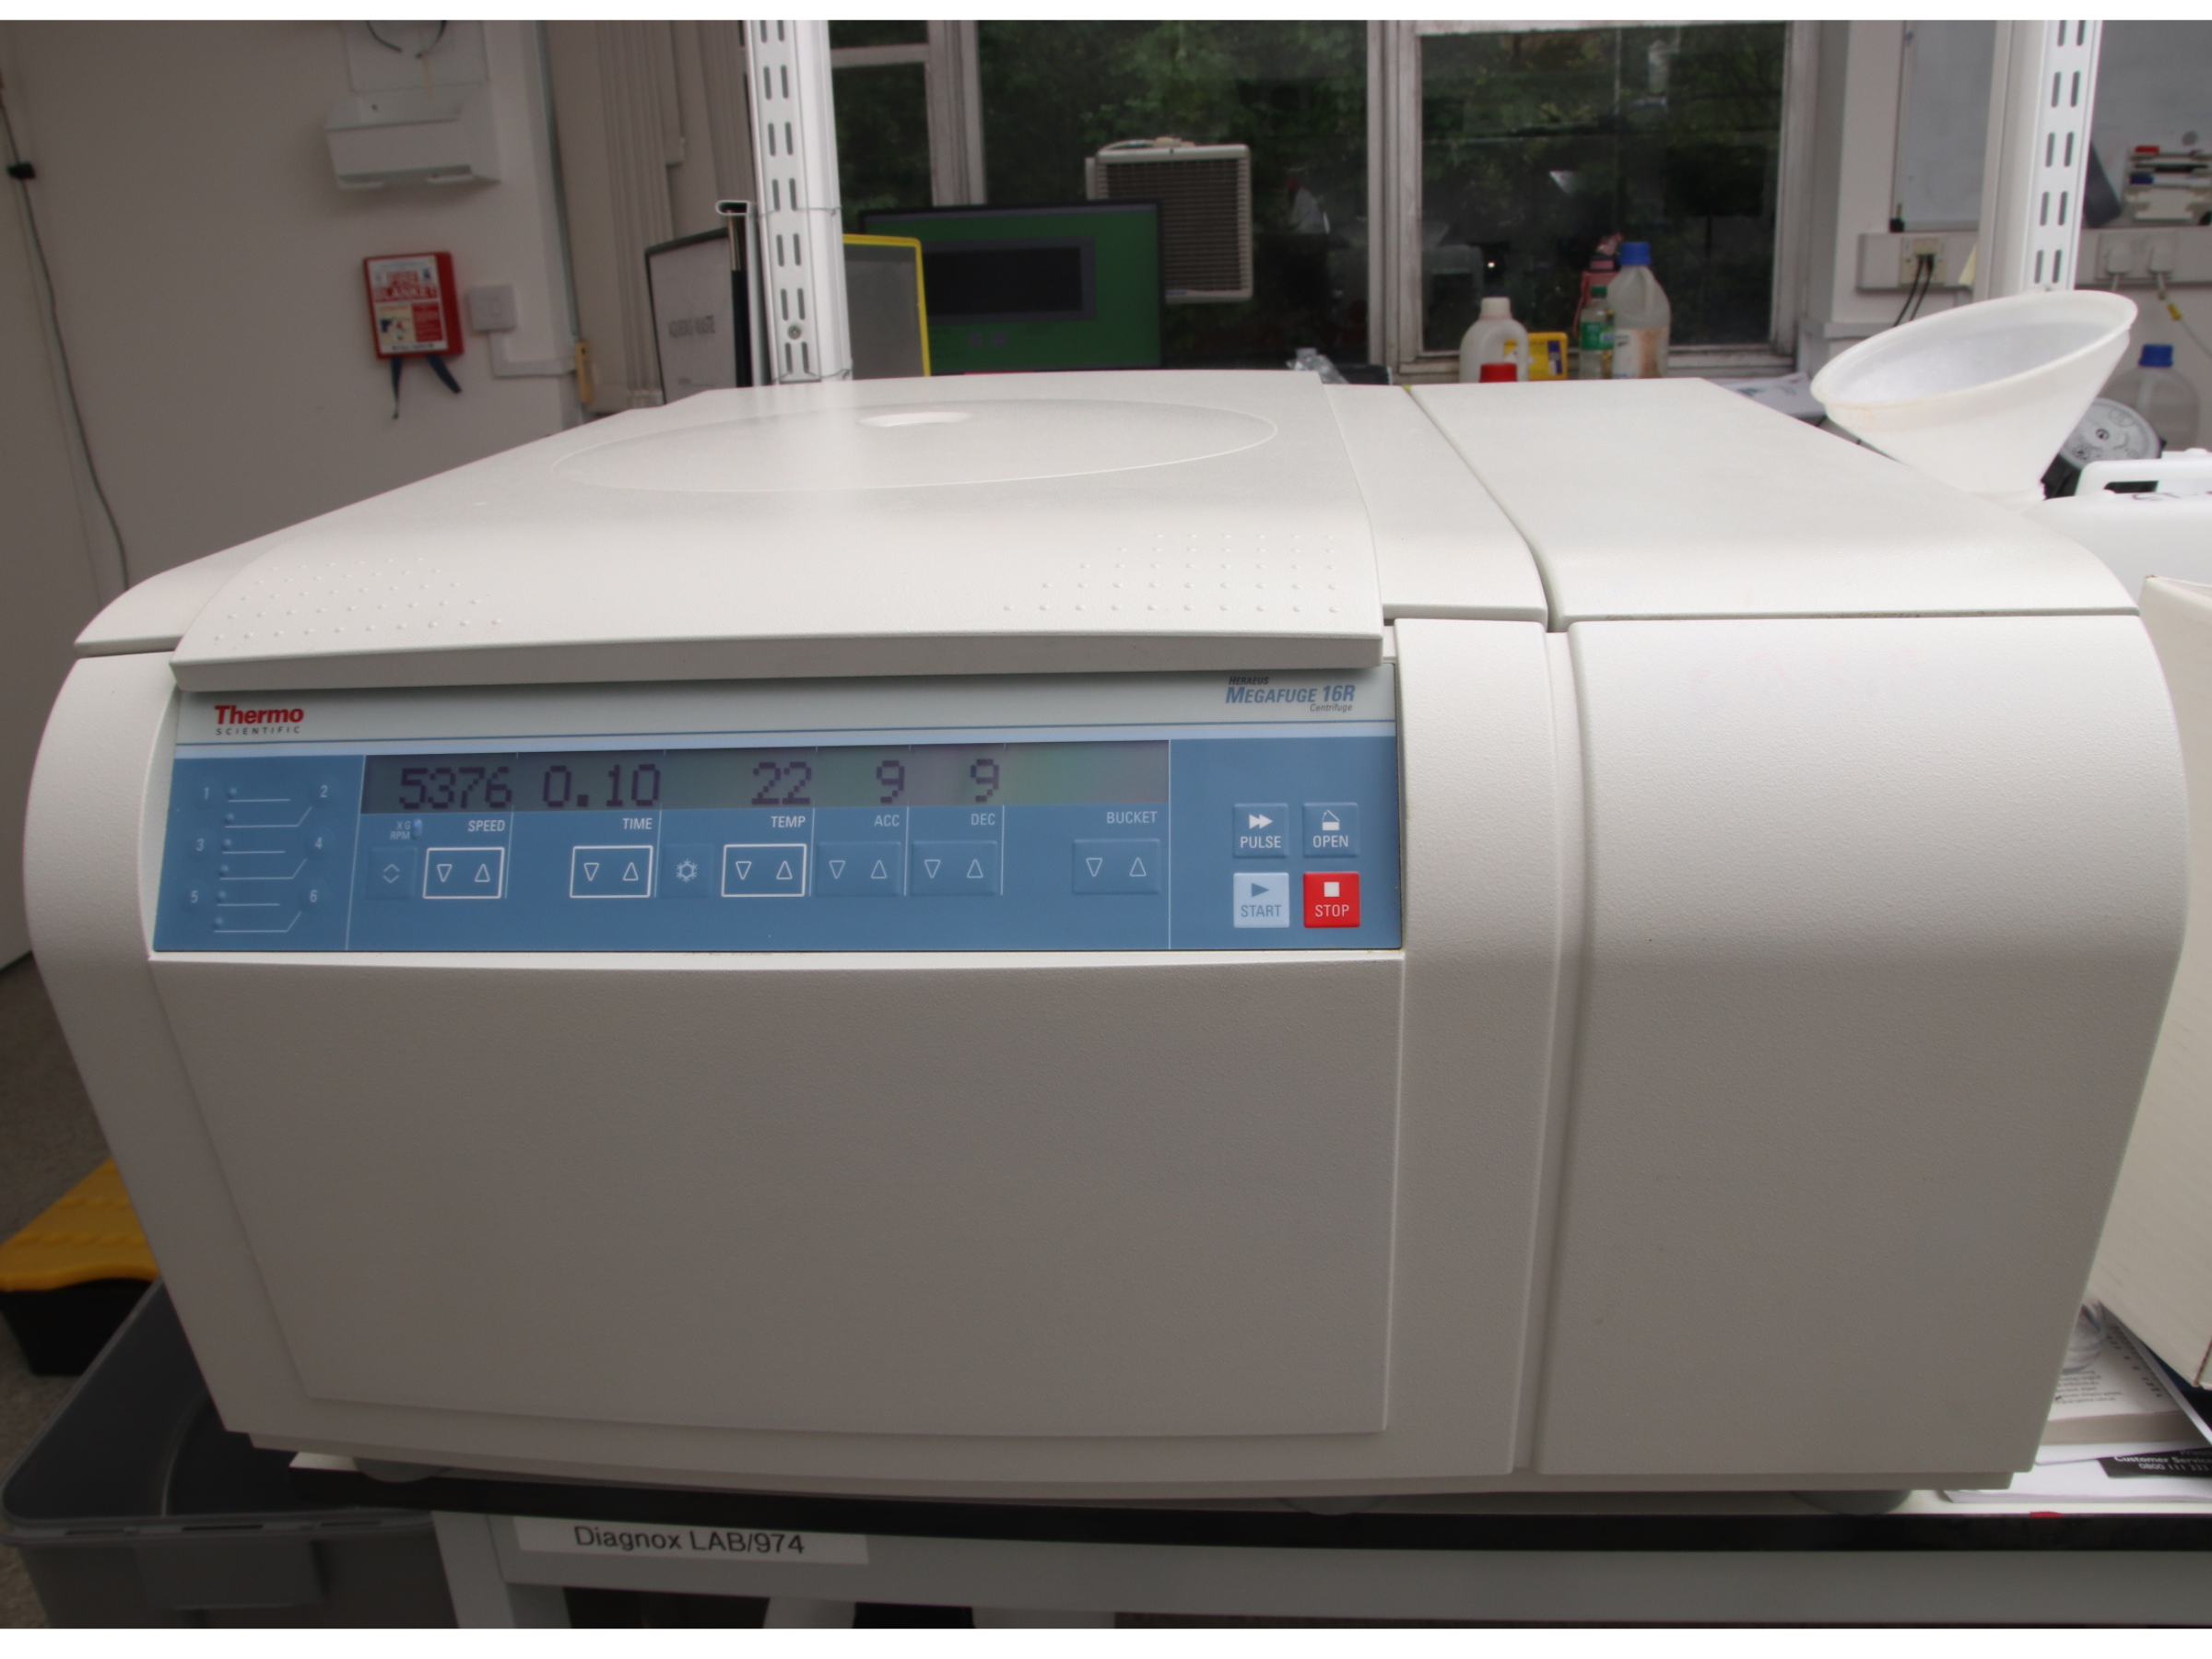 Thermo Megafuge 16R refrigerated centrifuge in the laboratory